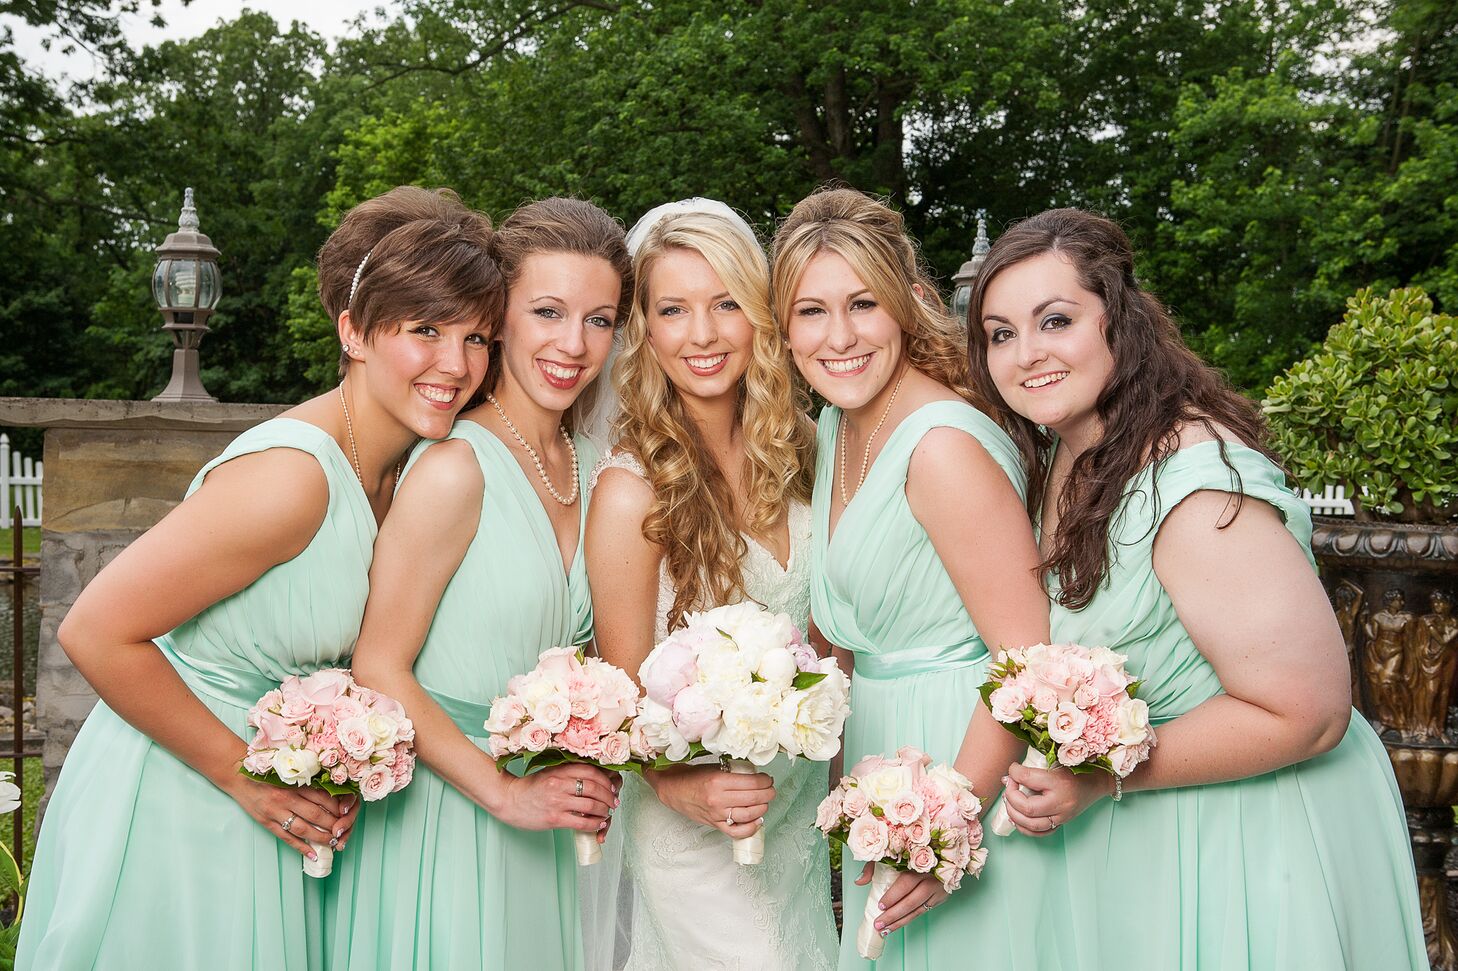 Mint Bridesmaid Dresses And Pink Bouquets